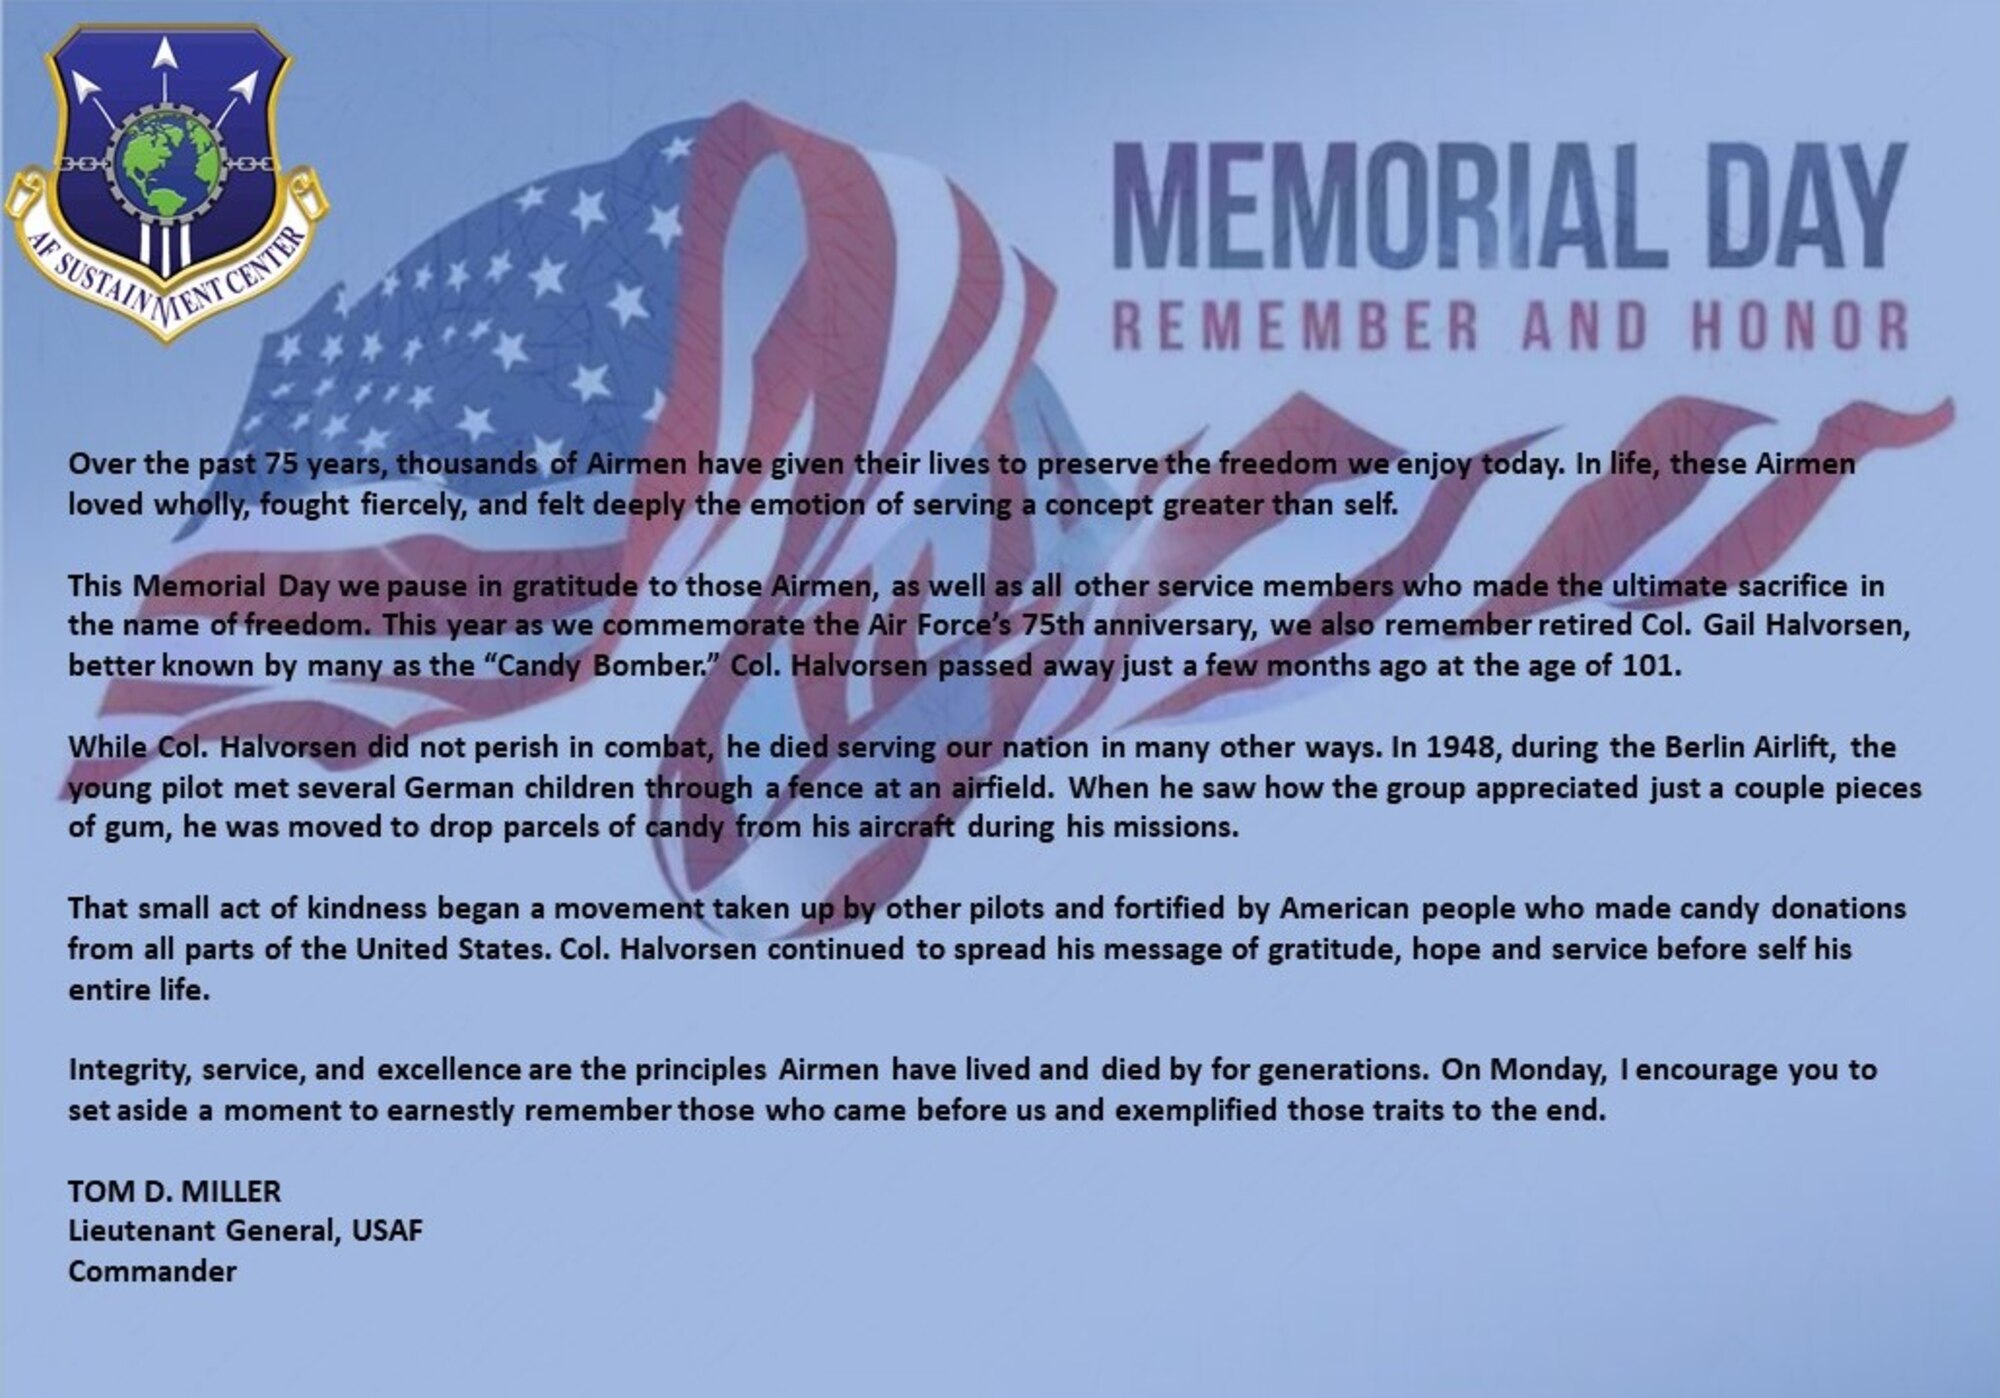 AFSC Memorial Day message graphic